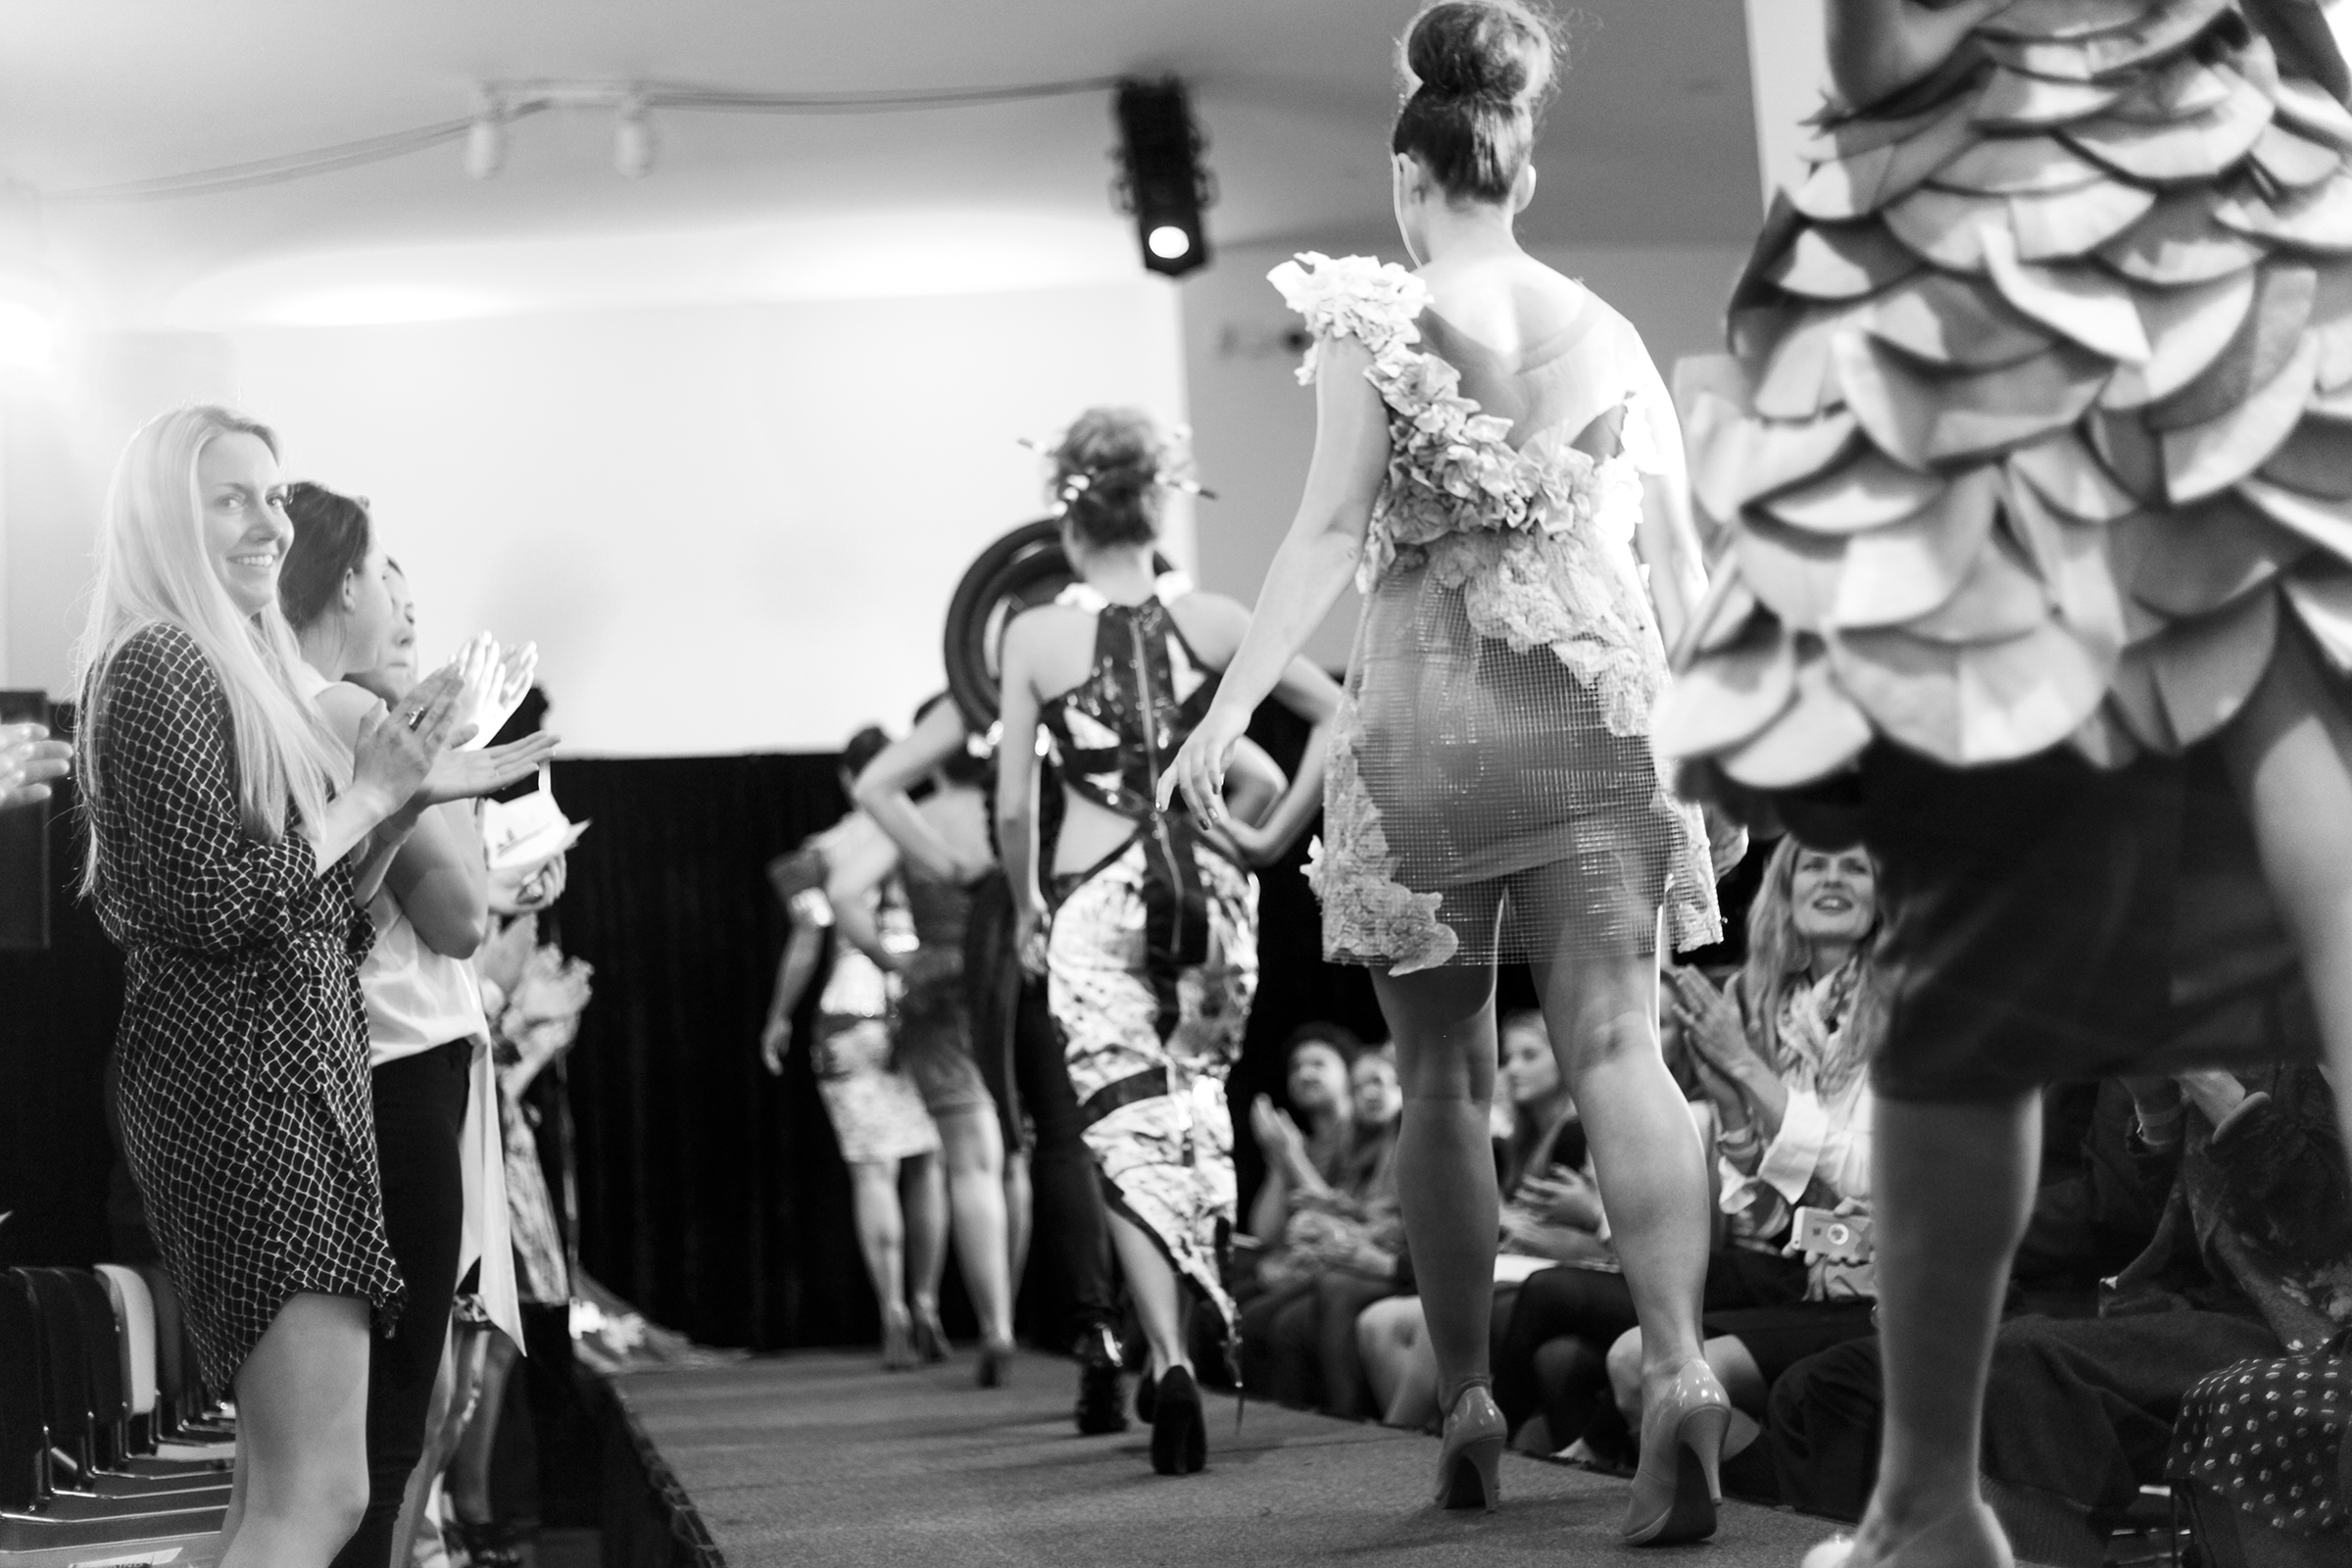 A row of people walking down the runway